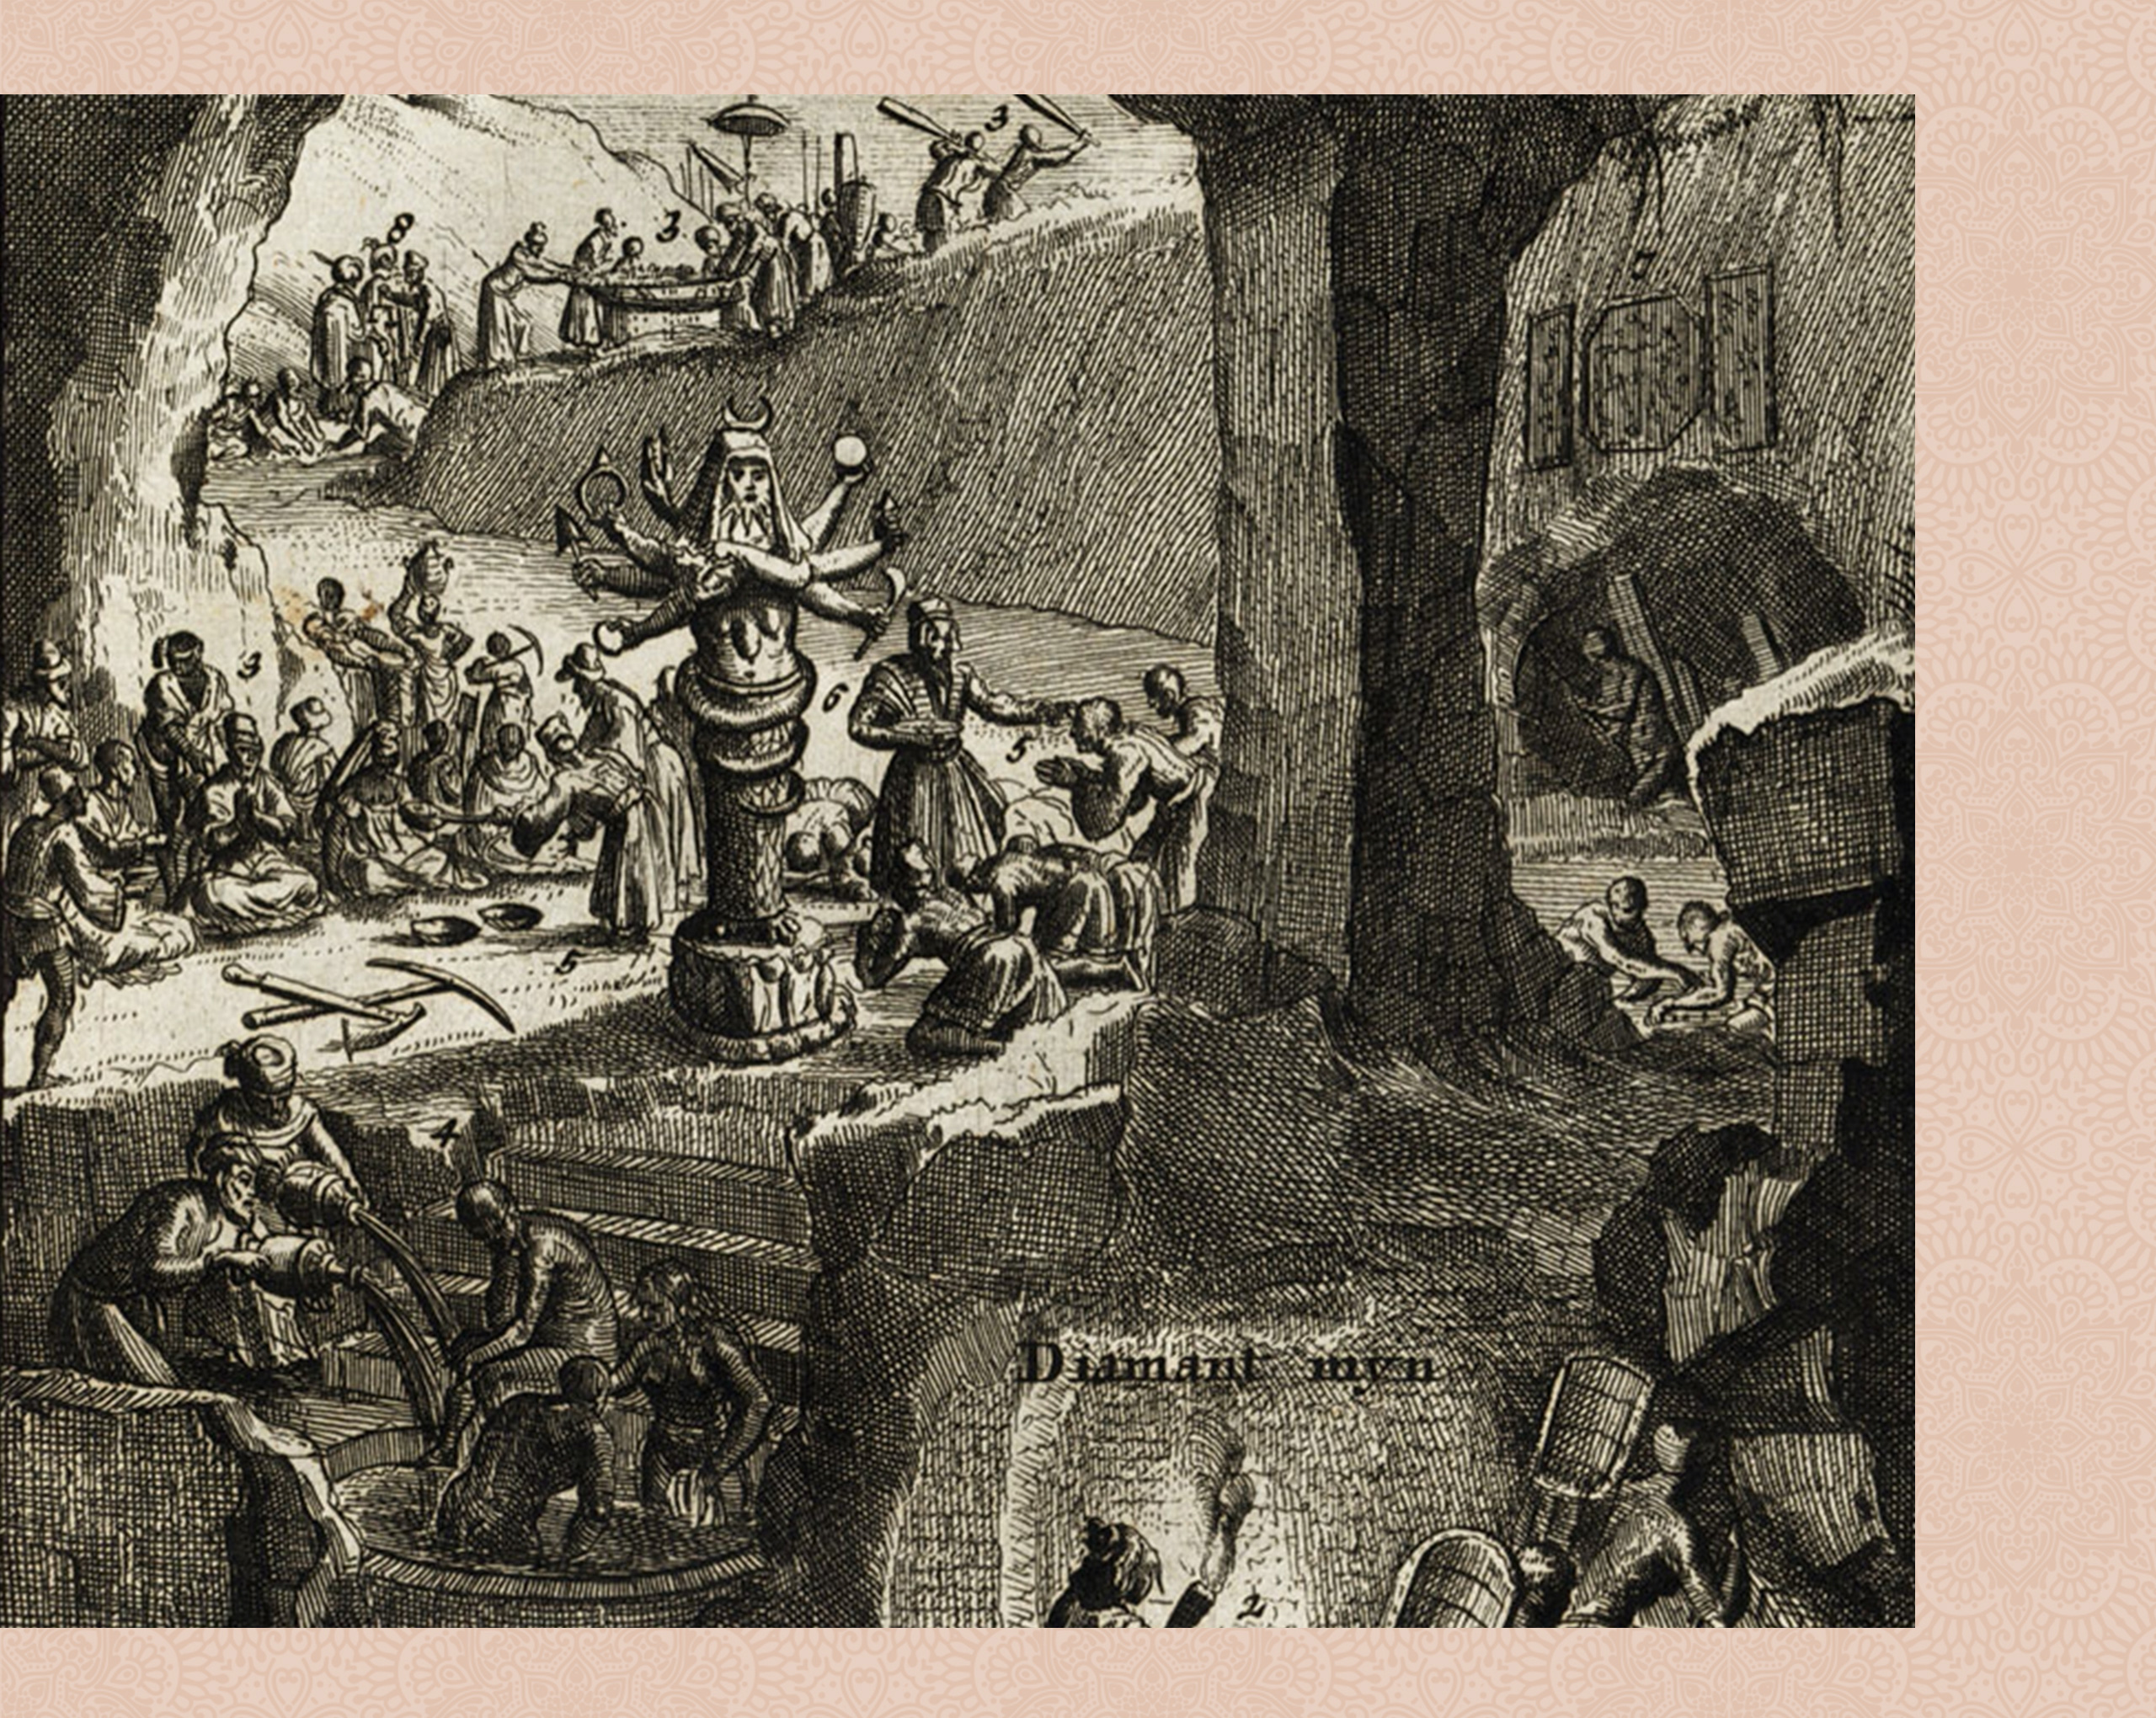 Life at the Court of the King of Golconda, Including the Fabled Diamond Mines - From 'La galerie agreable du monde (etc.),' Published by P. van der Aa, Leyden, c. 1725 